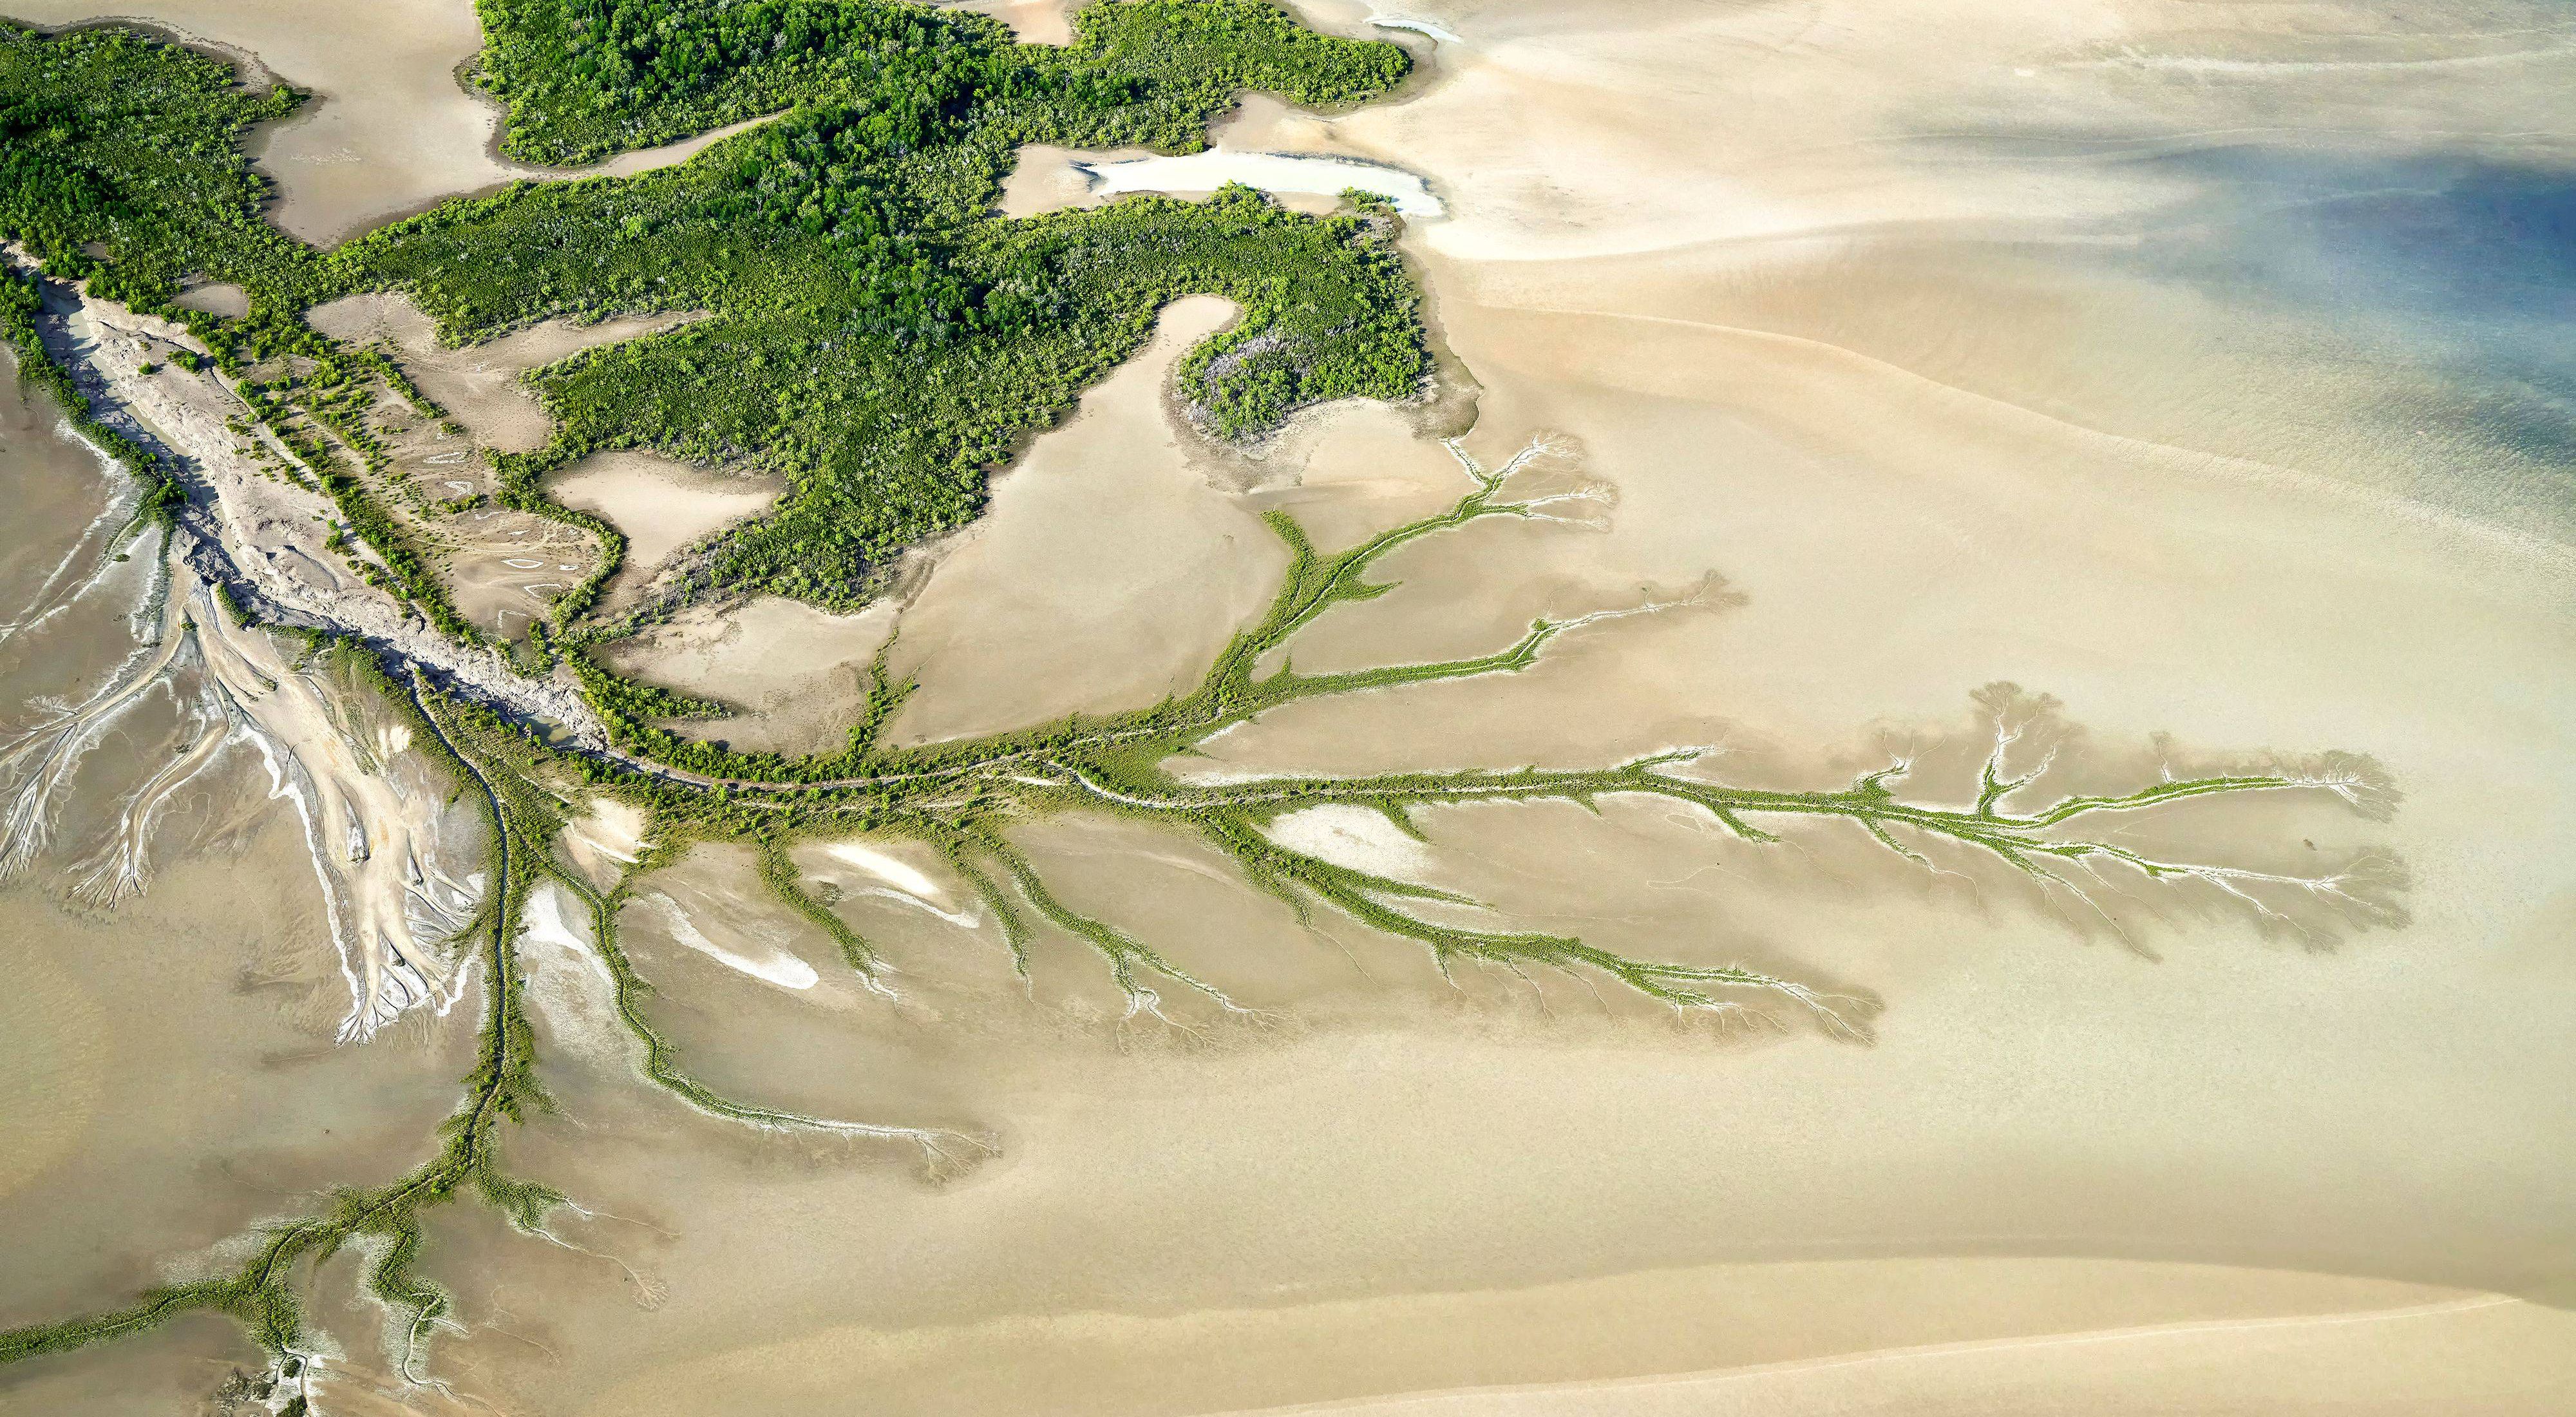 Tidal creek 3. Aerial view taken from a helicopter of tidal creeks in the Northern Territory.